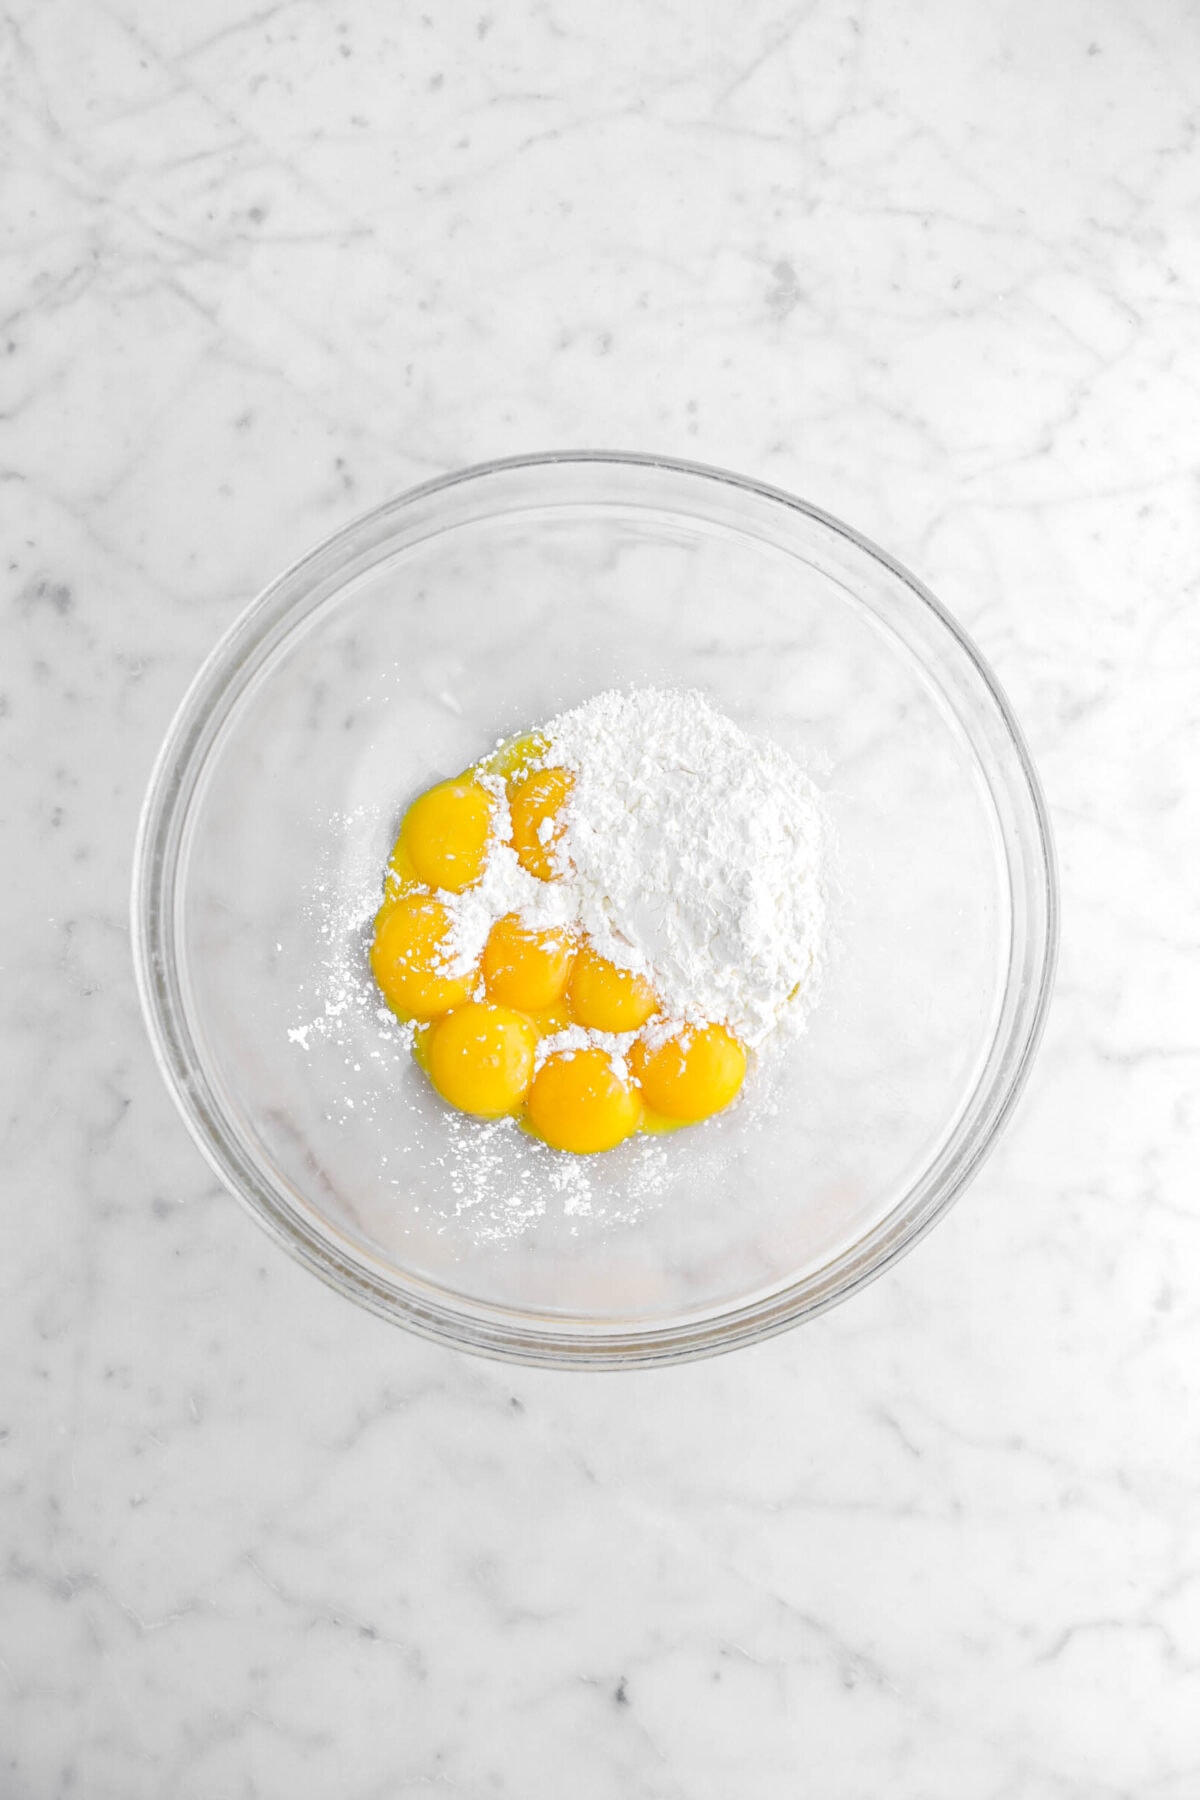 egg yolks and corn starch in glass bowl.